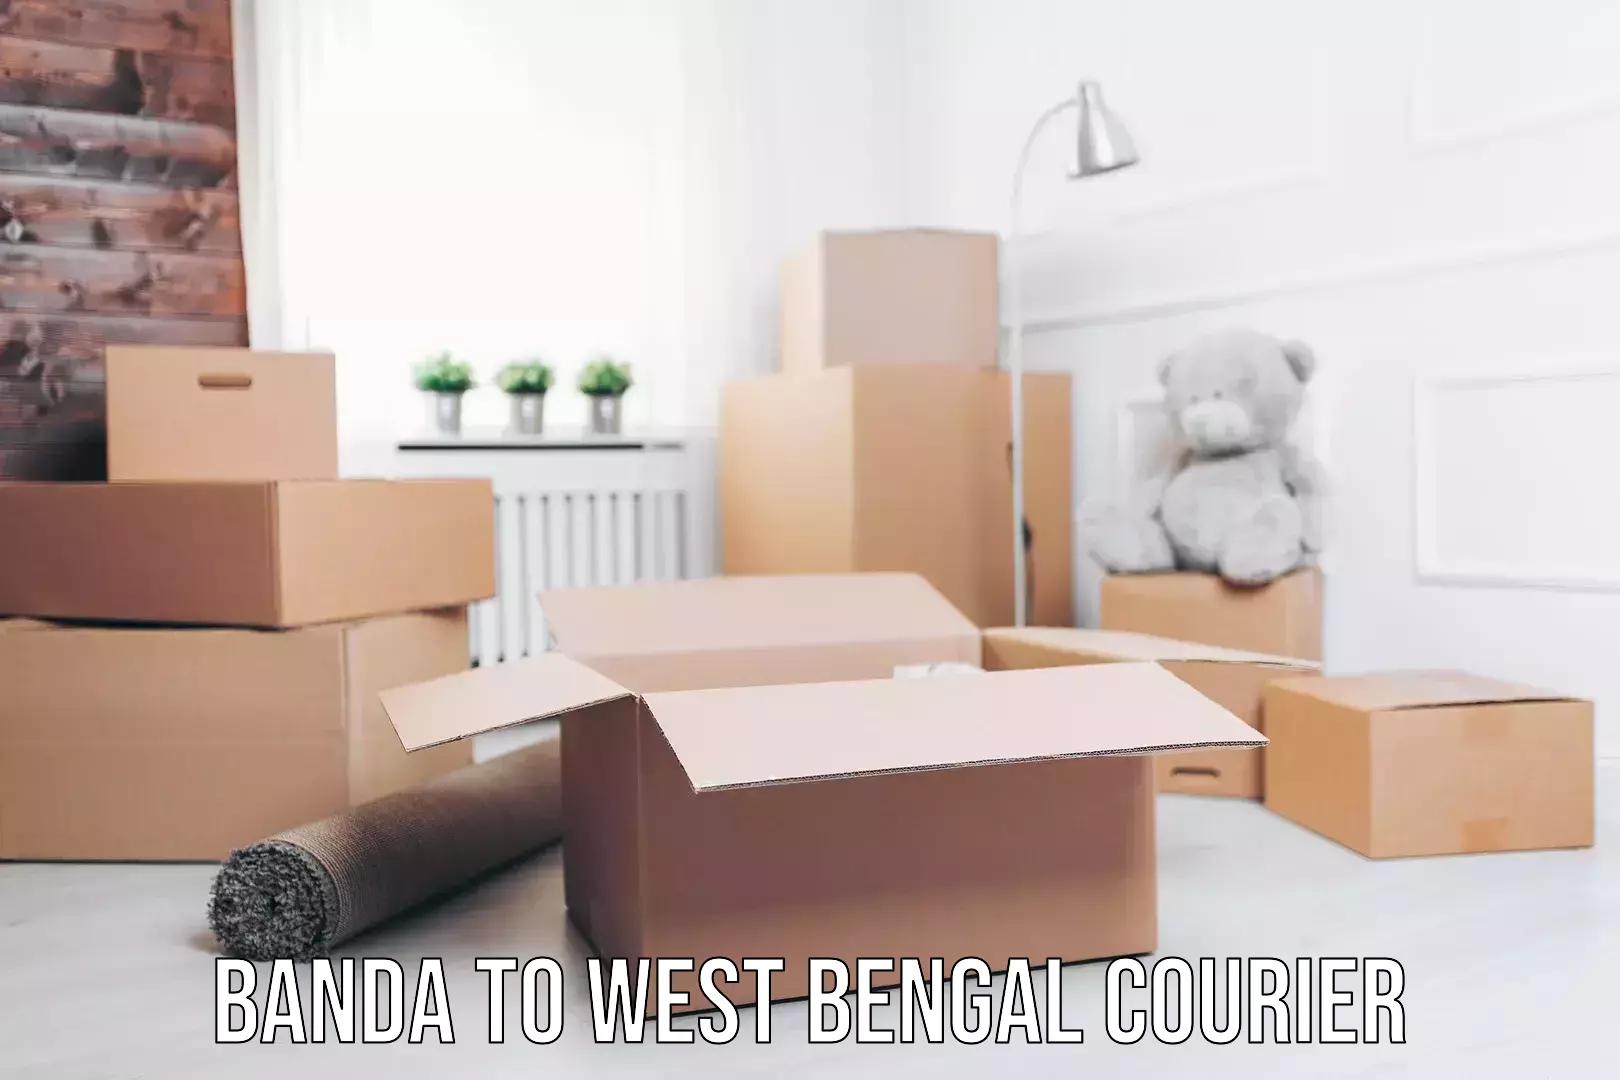 Nationwide delivery network Banda to West Bengal